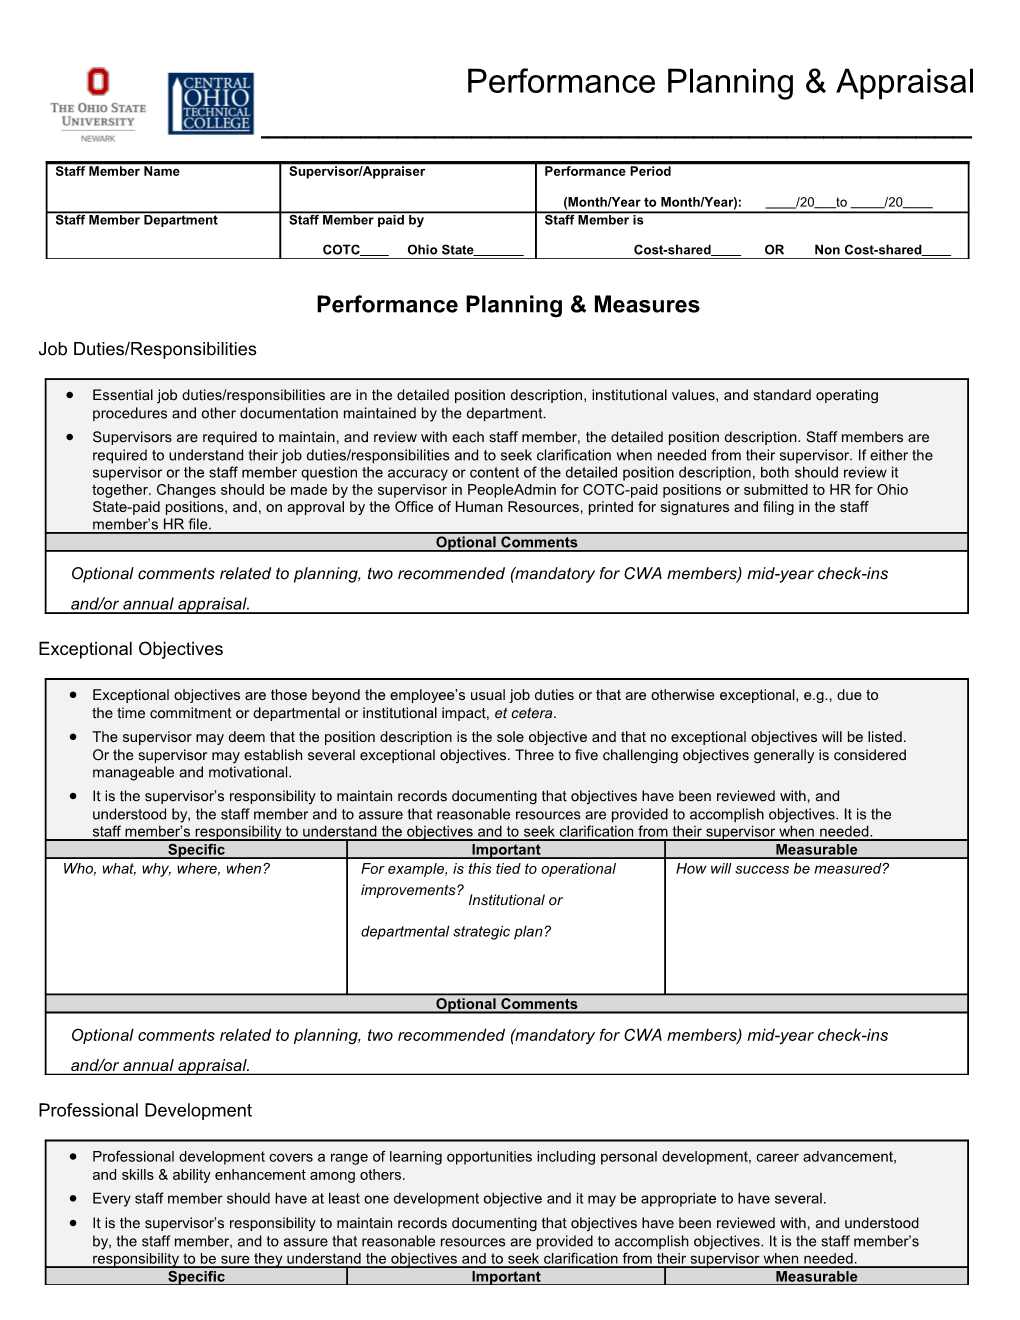 Ohio State Newark and COTC Performance Planning & Appraisal Form